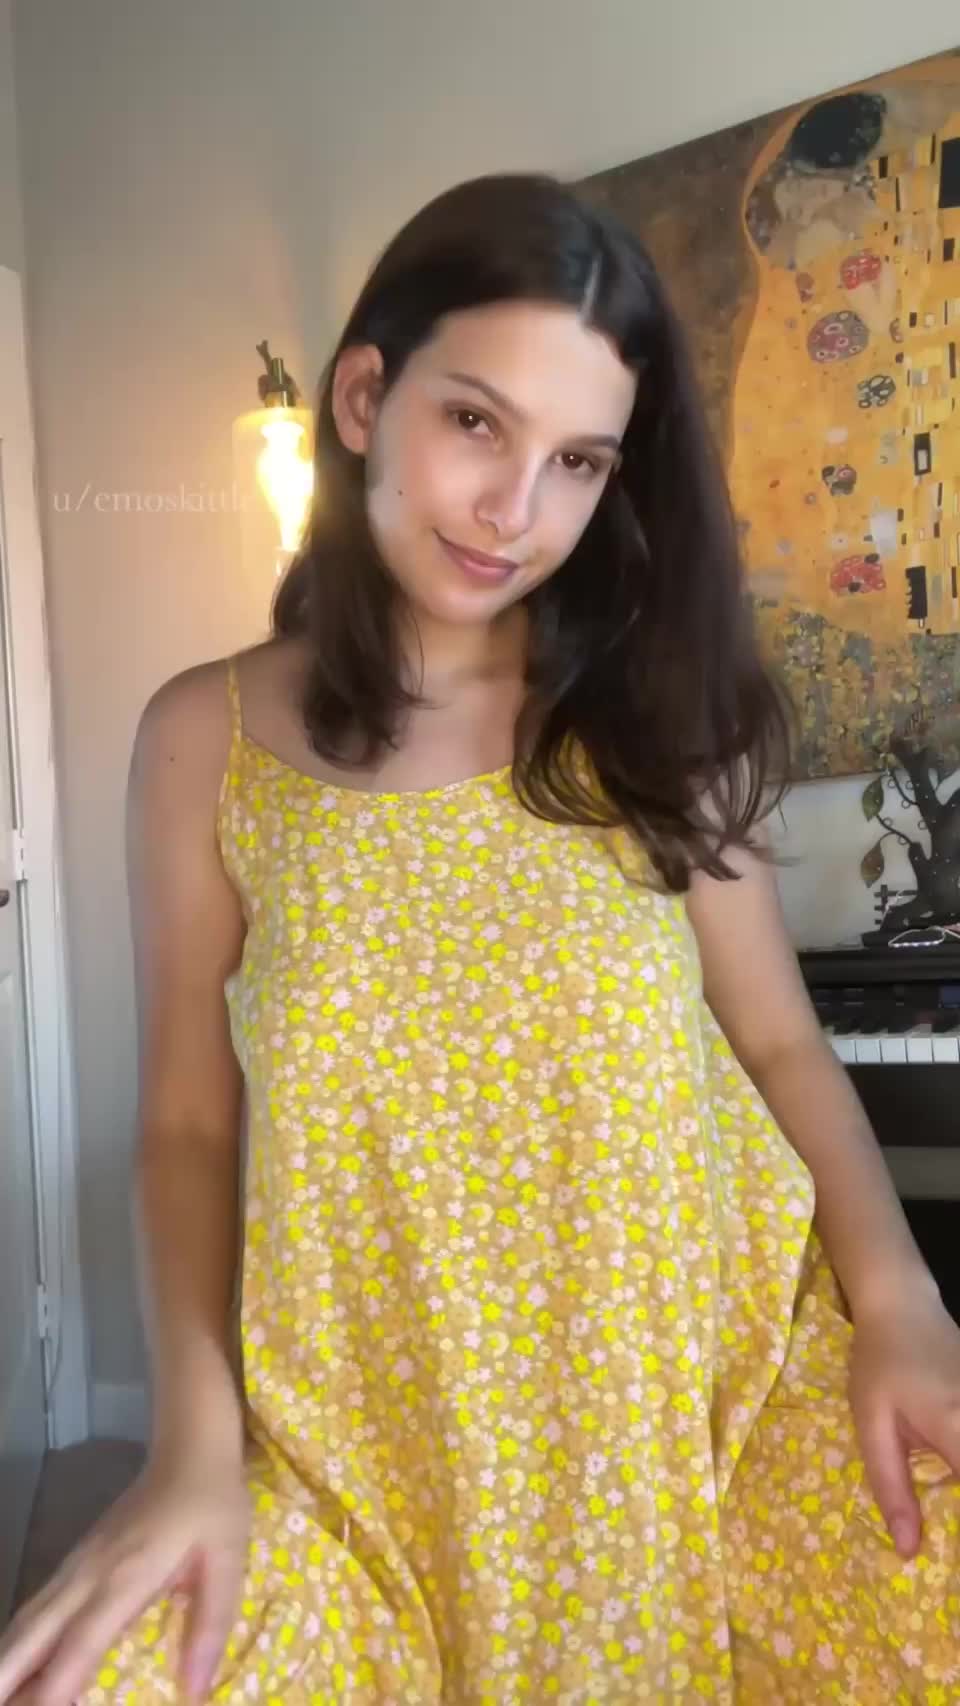 Dresses make it easy to fuck whenever I want! : video clip